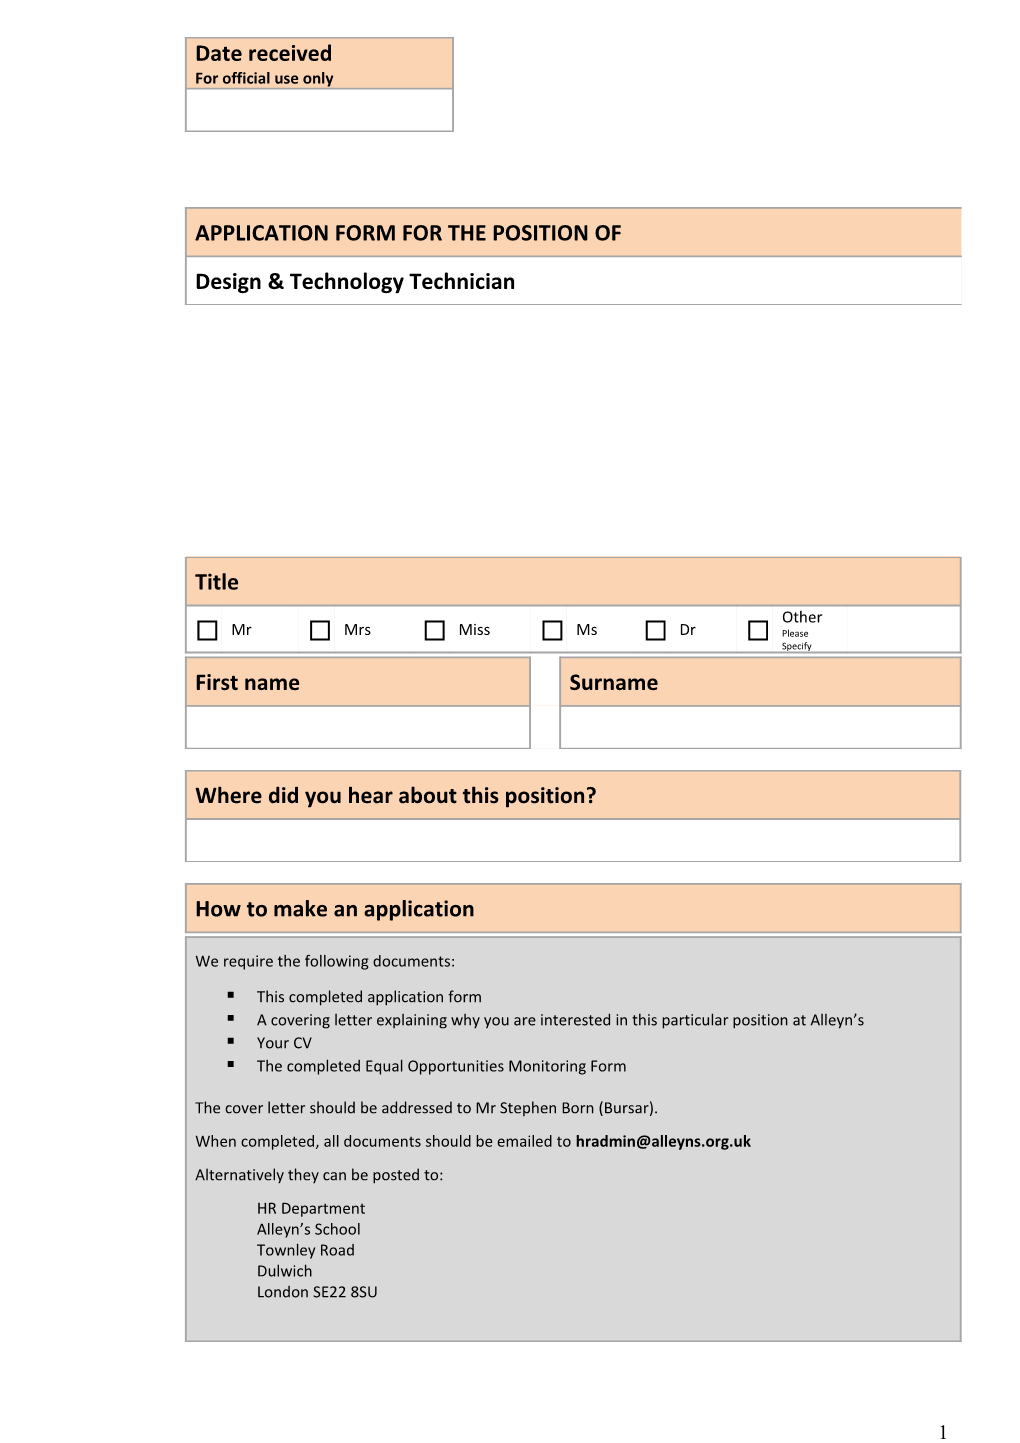 This Completed Application Form